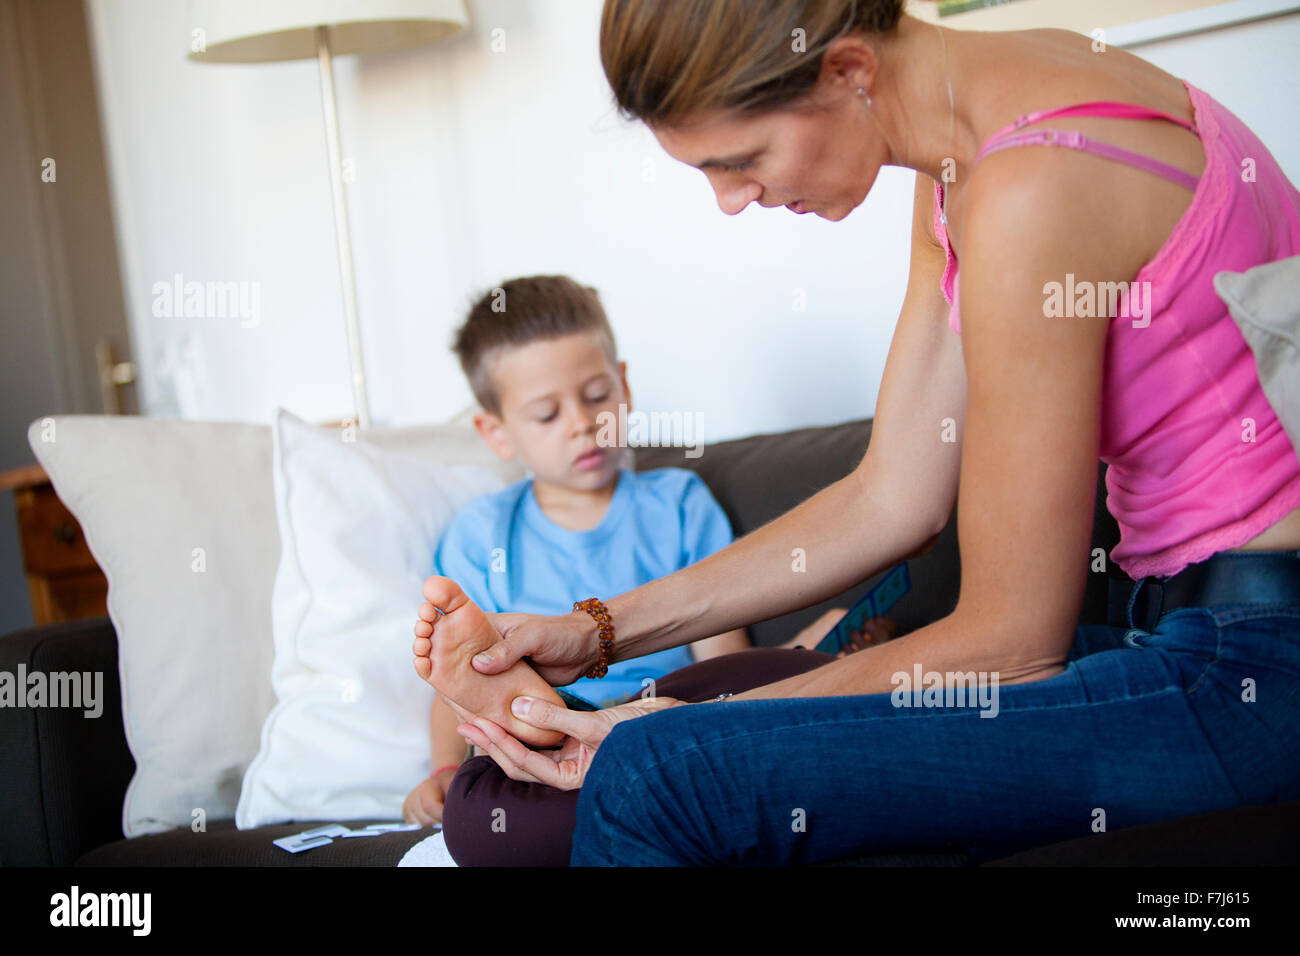 Reportage on foot reflexology for children. The reflexologist deals with children from the age of 5 upwards. Reflexology acts on their concentration, memory, balance, serenity and sleep. A 5-year old boy in a session. Stock Photo